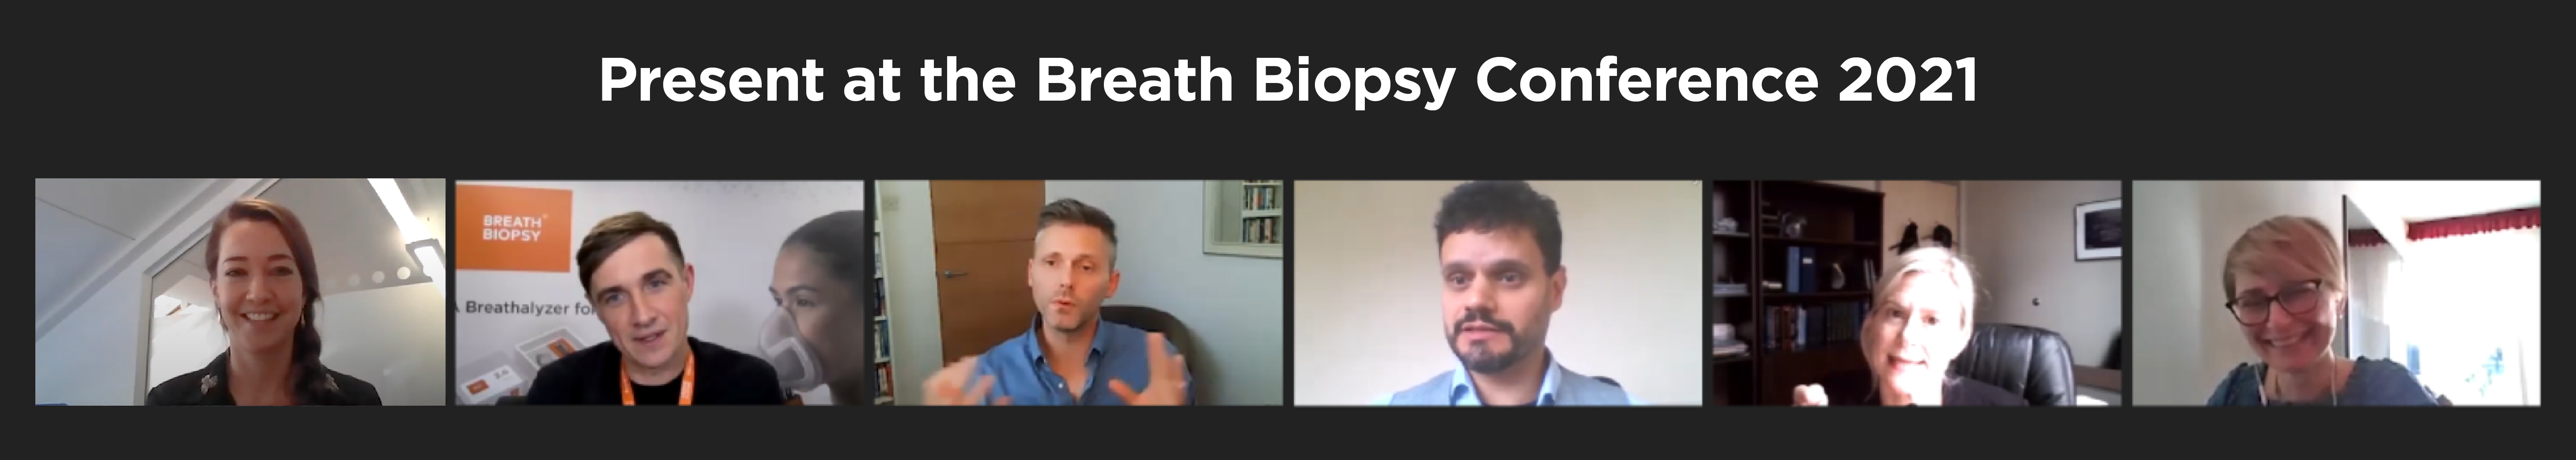 Present at the Breath Biopsy Conference 2021